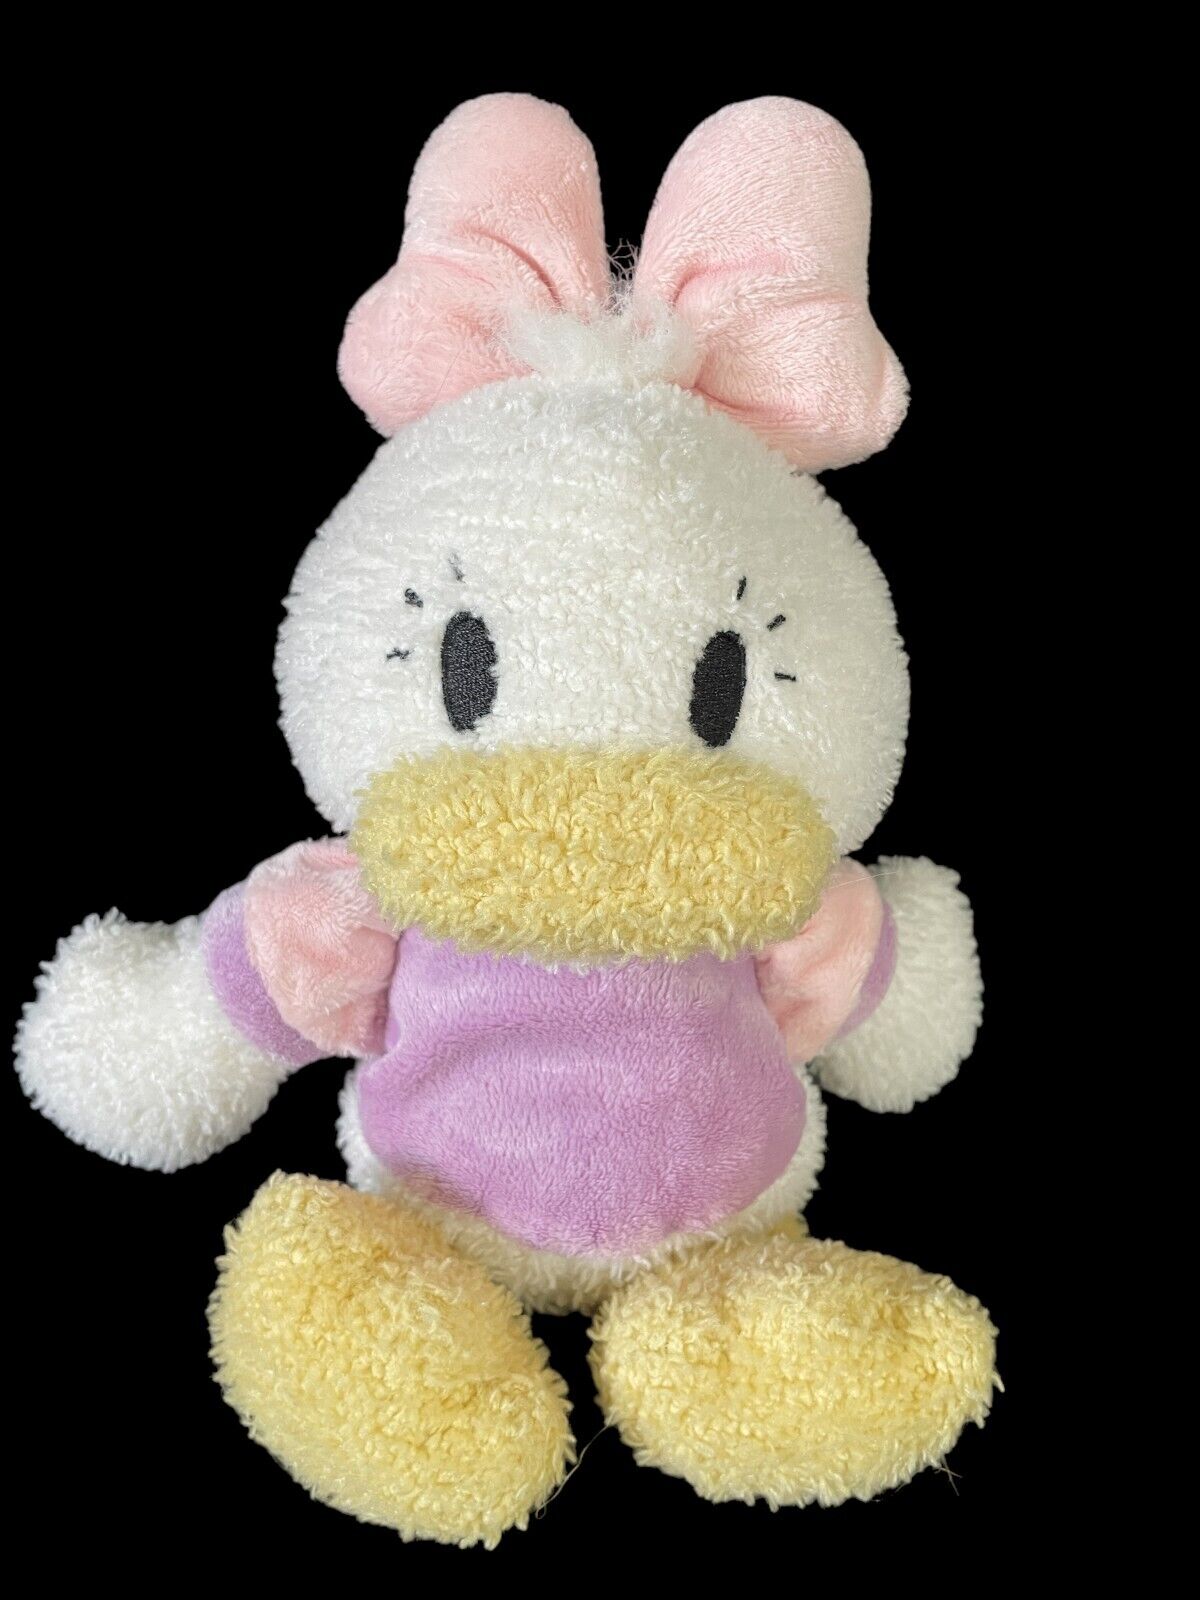 Disney Little Ones Baby  Daisy Duck Plush Lovey Stuffed Animal Toy - No tags